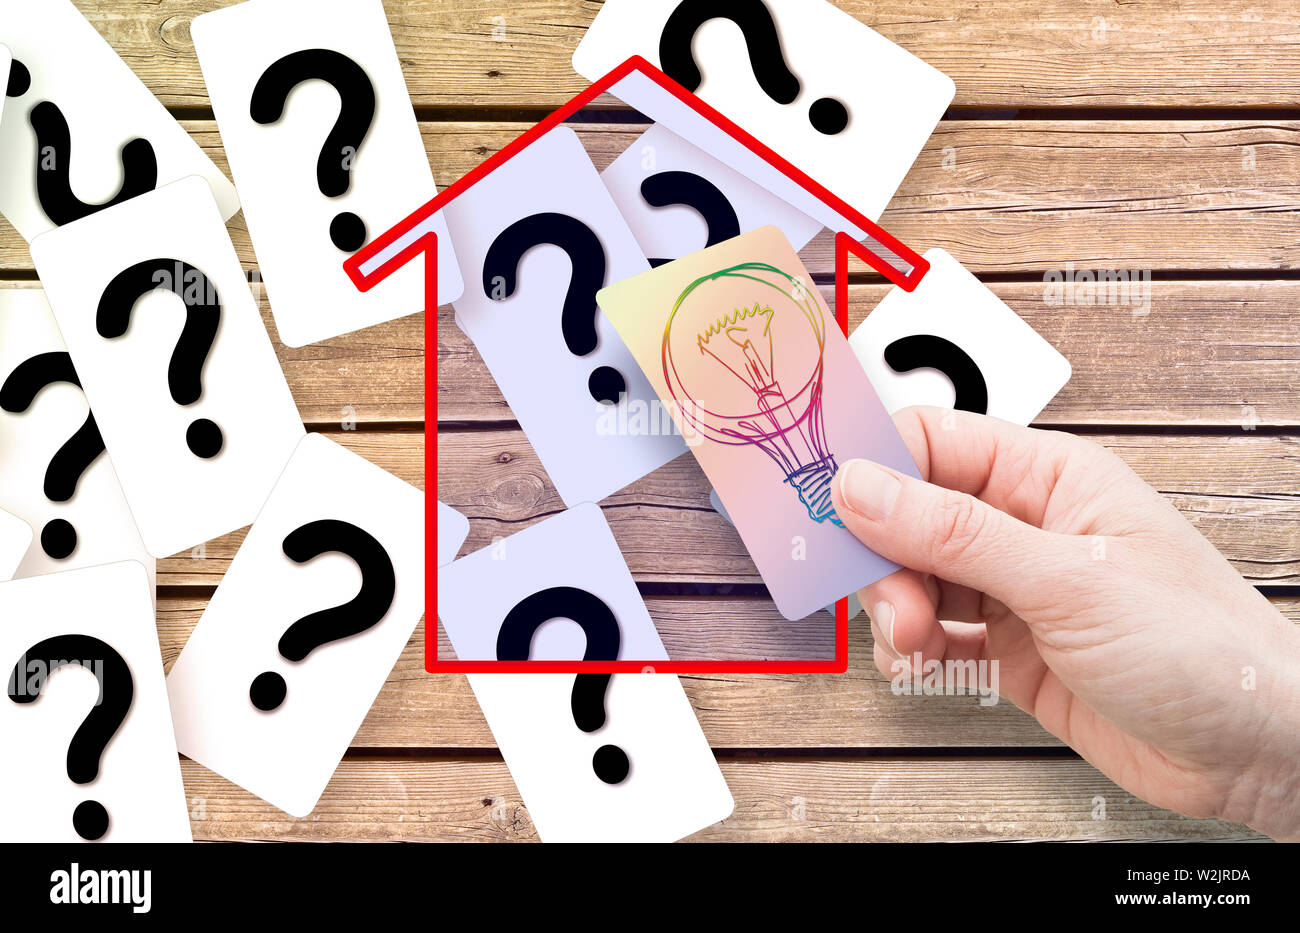 The solution to doubts, questions and uncertainties about buildings - concept image with hand holding a card with light bulb Stock Photo